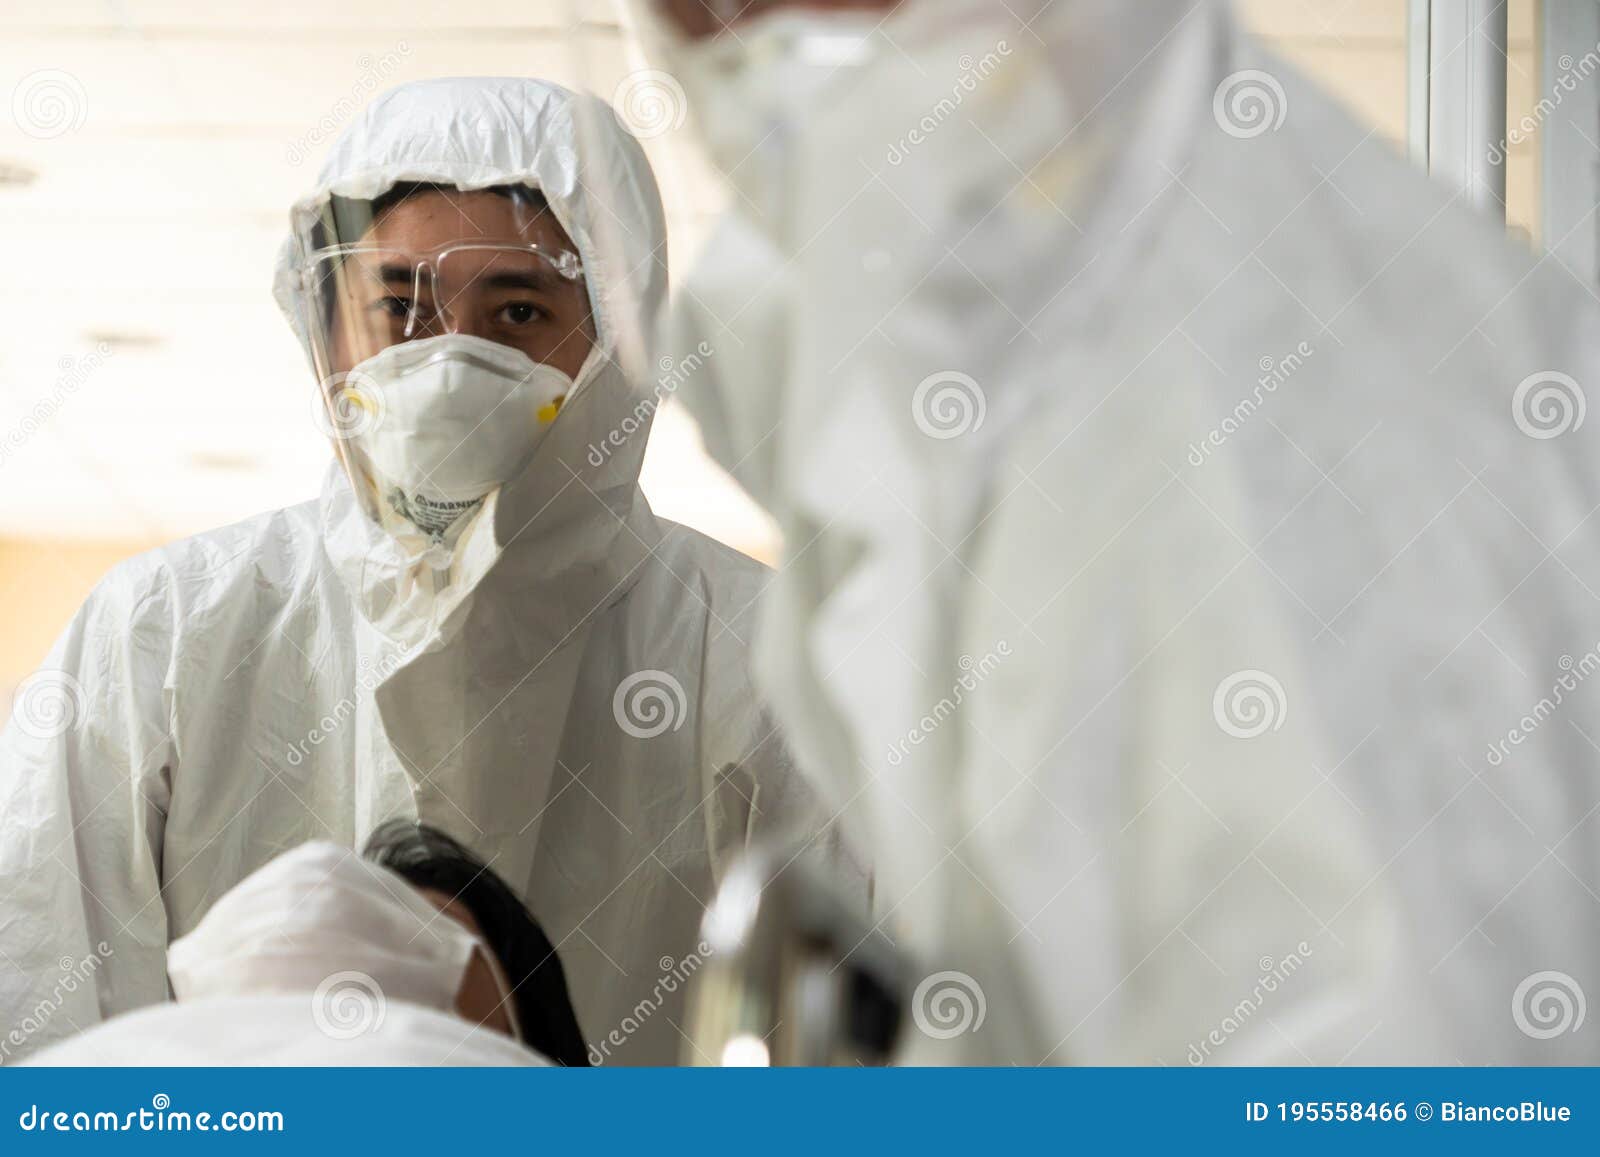 Emergency Medic and Doctor Moving Patient To Emergency Room Stock Photo ...